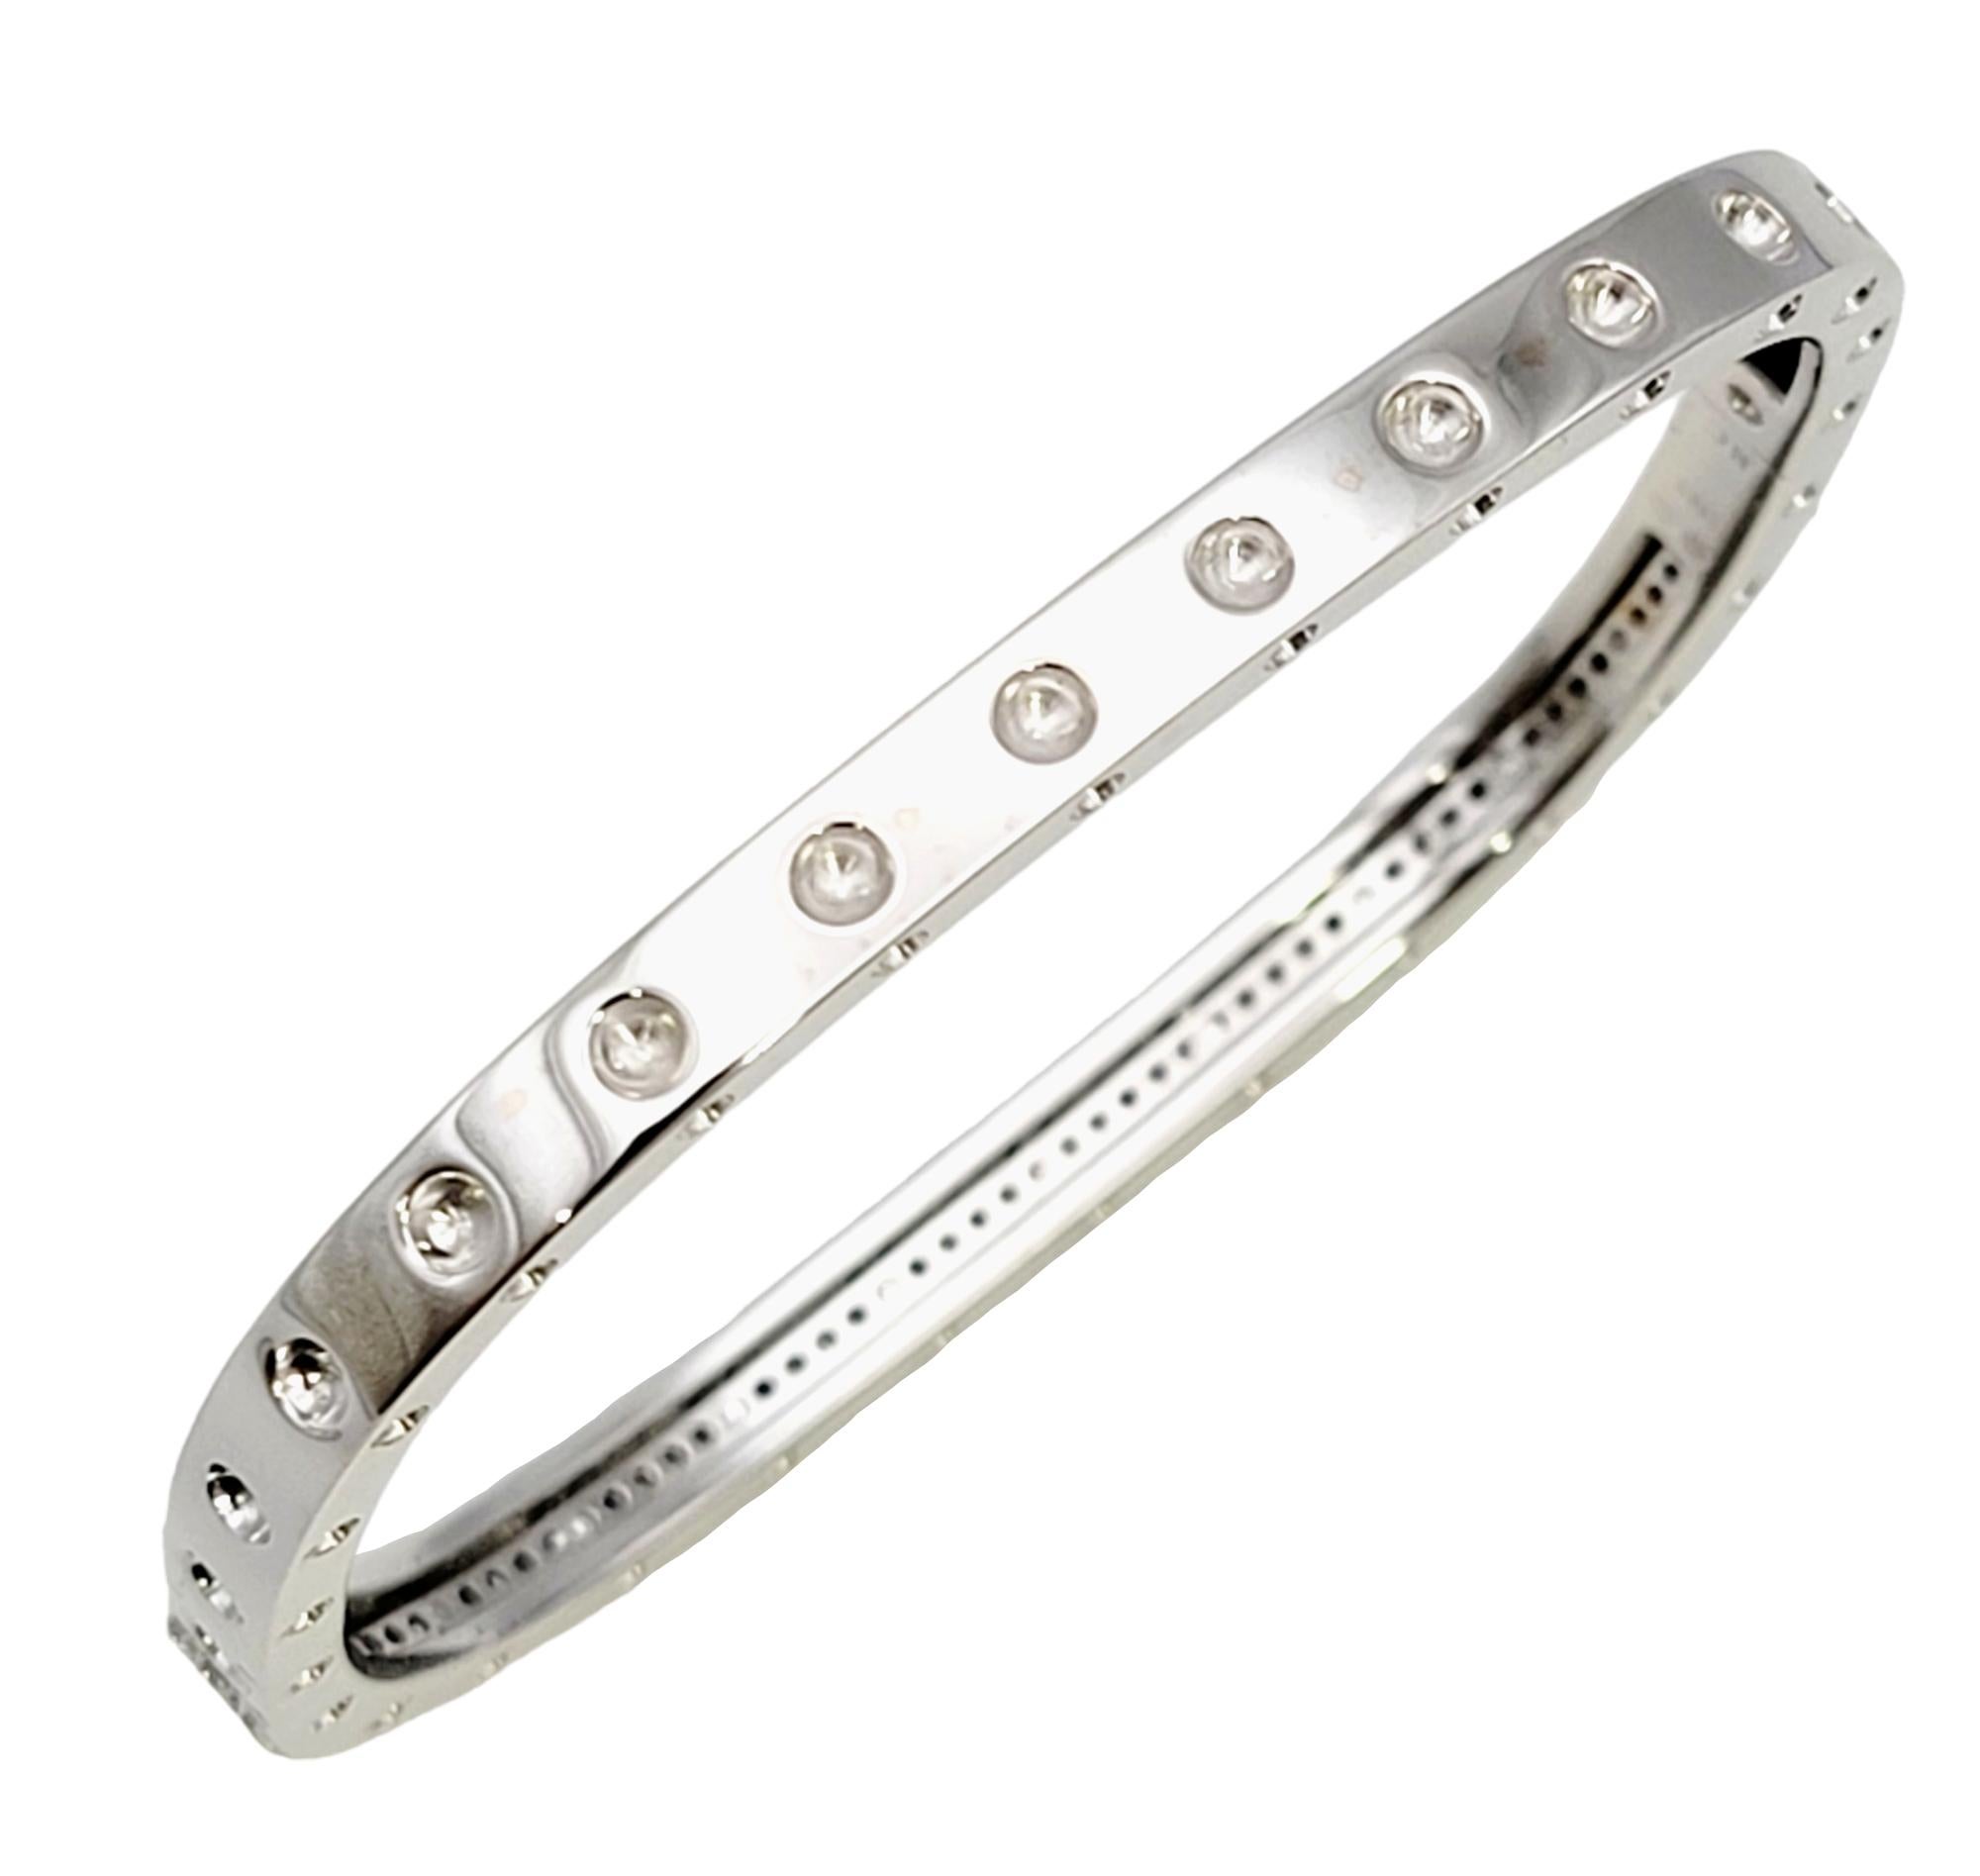 This incredible bracelet from Roberto Coin's Pois Moi collection is stylish, elegant, and versatile. Items from this specific collection of his are known for their simplicity, linear design and modern appeal, which is exactly what we see here in